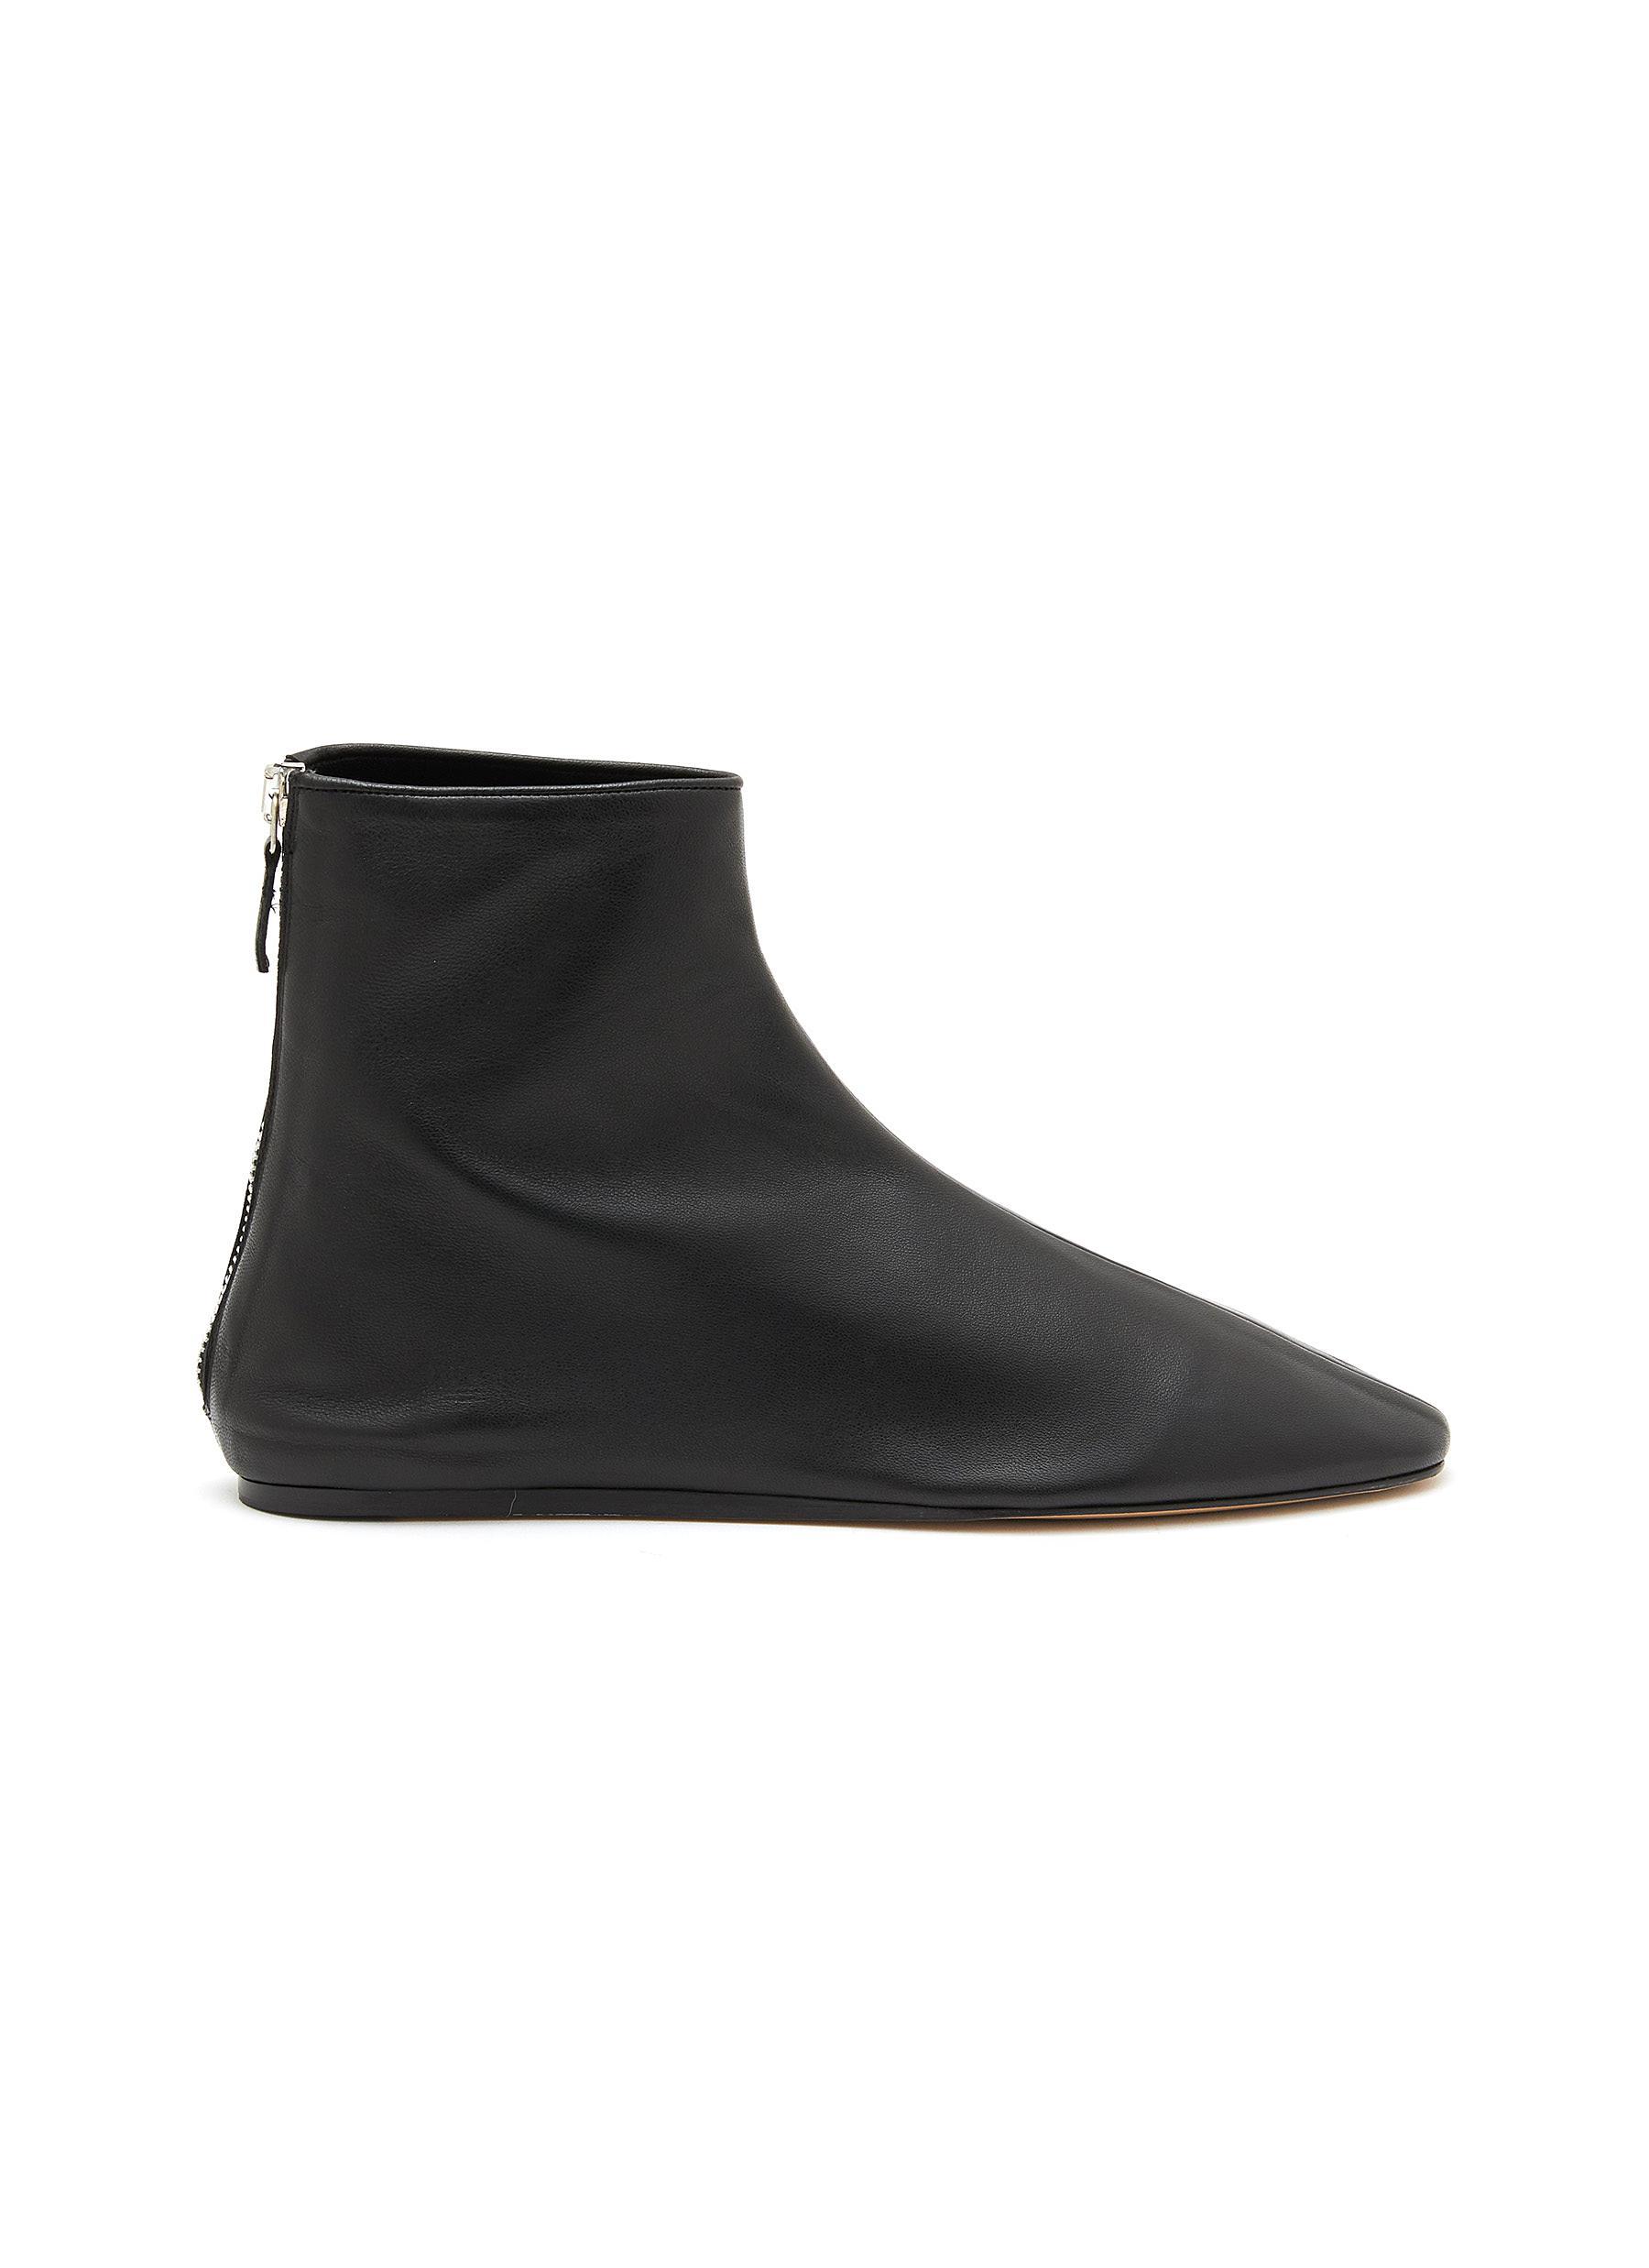 Le Monde Beryl Luna Leather Ankle Boots in Black | Lyst